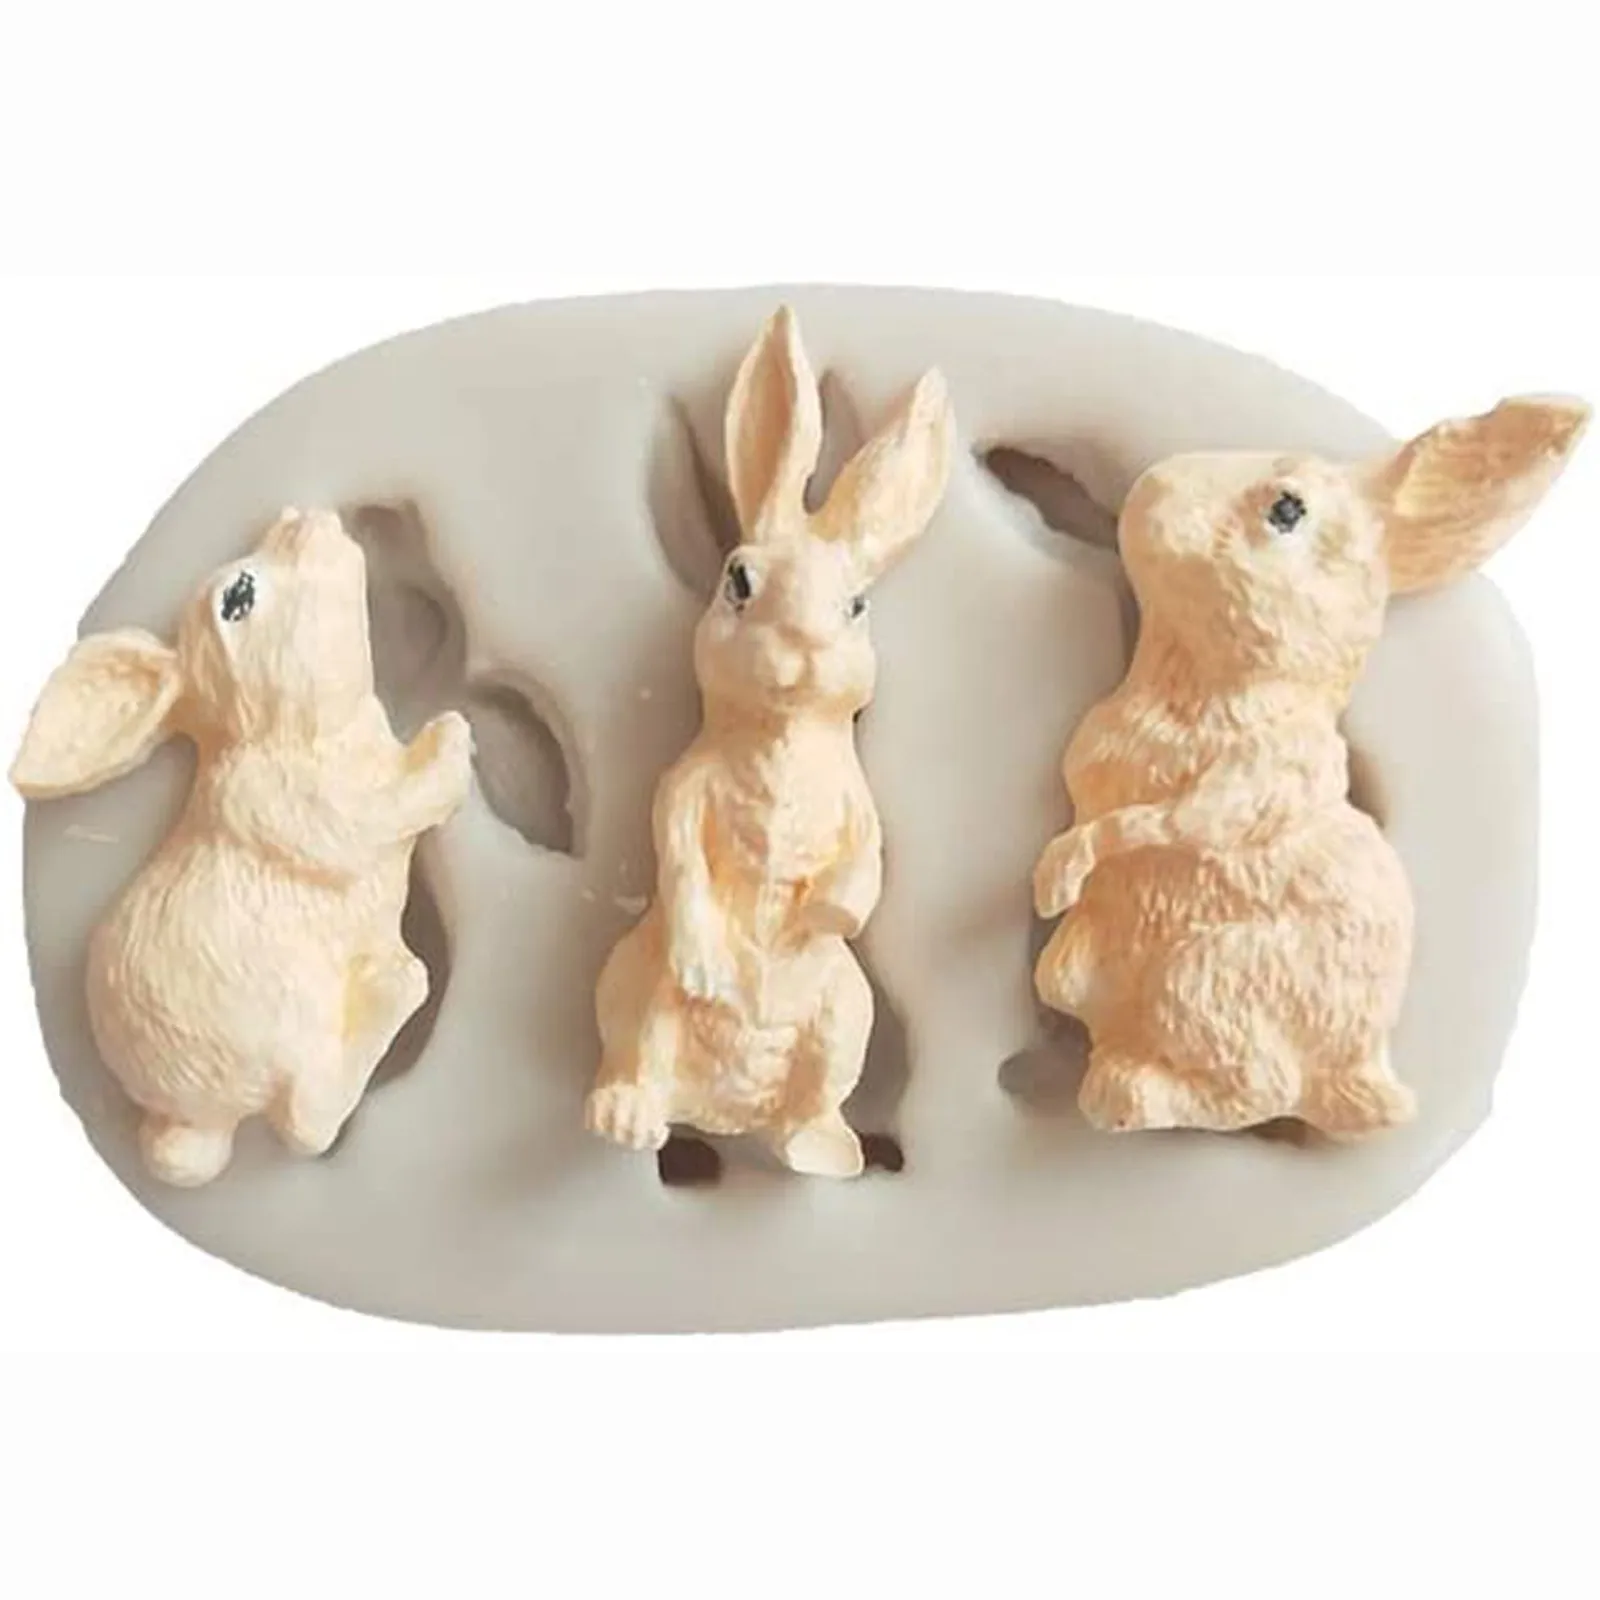 

3d Rabbit Easter Bunny Silicone Mold Fondant Cake Cupcake Cookie Baking Candy Chocolate Gumpaste Decorating Baking Tools #632